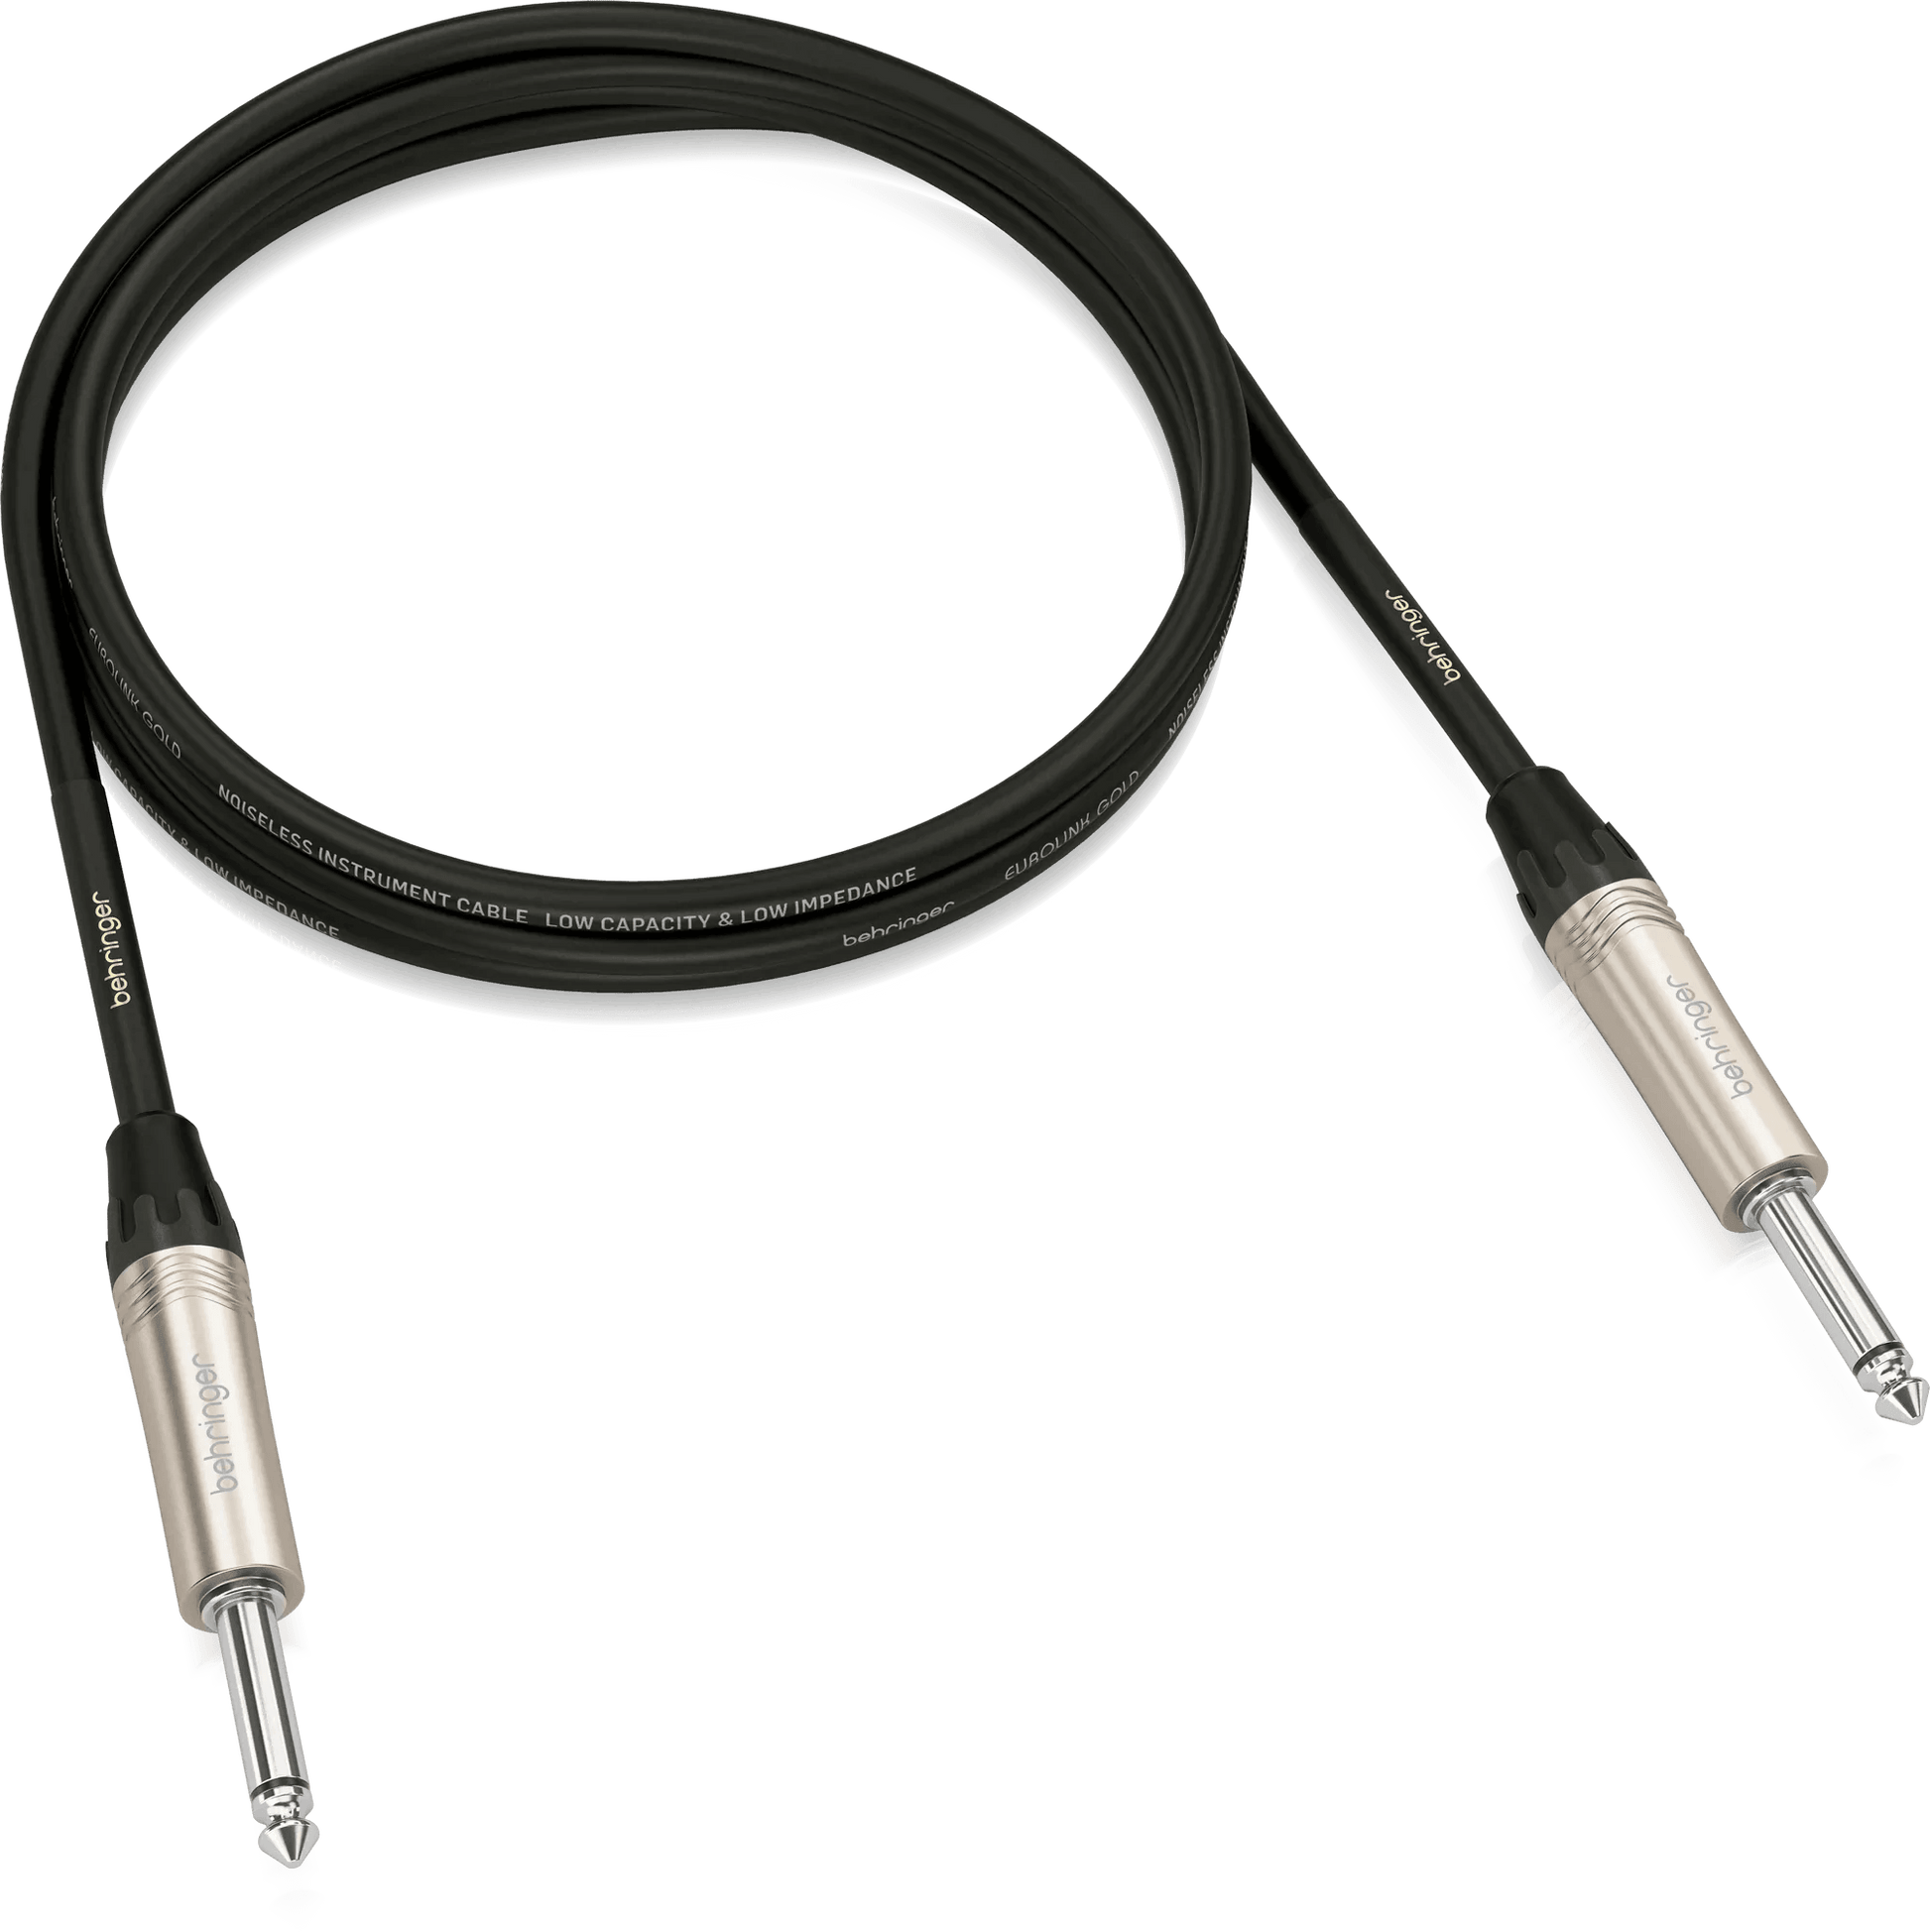 Behringer GIC-150 Gold Performance 1.5 m (5 ft) Instrument Cable with 1/4" TS Connectors